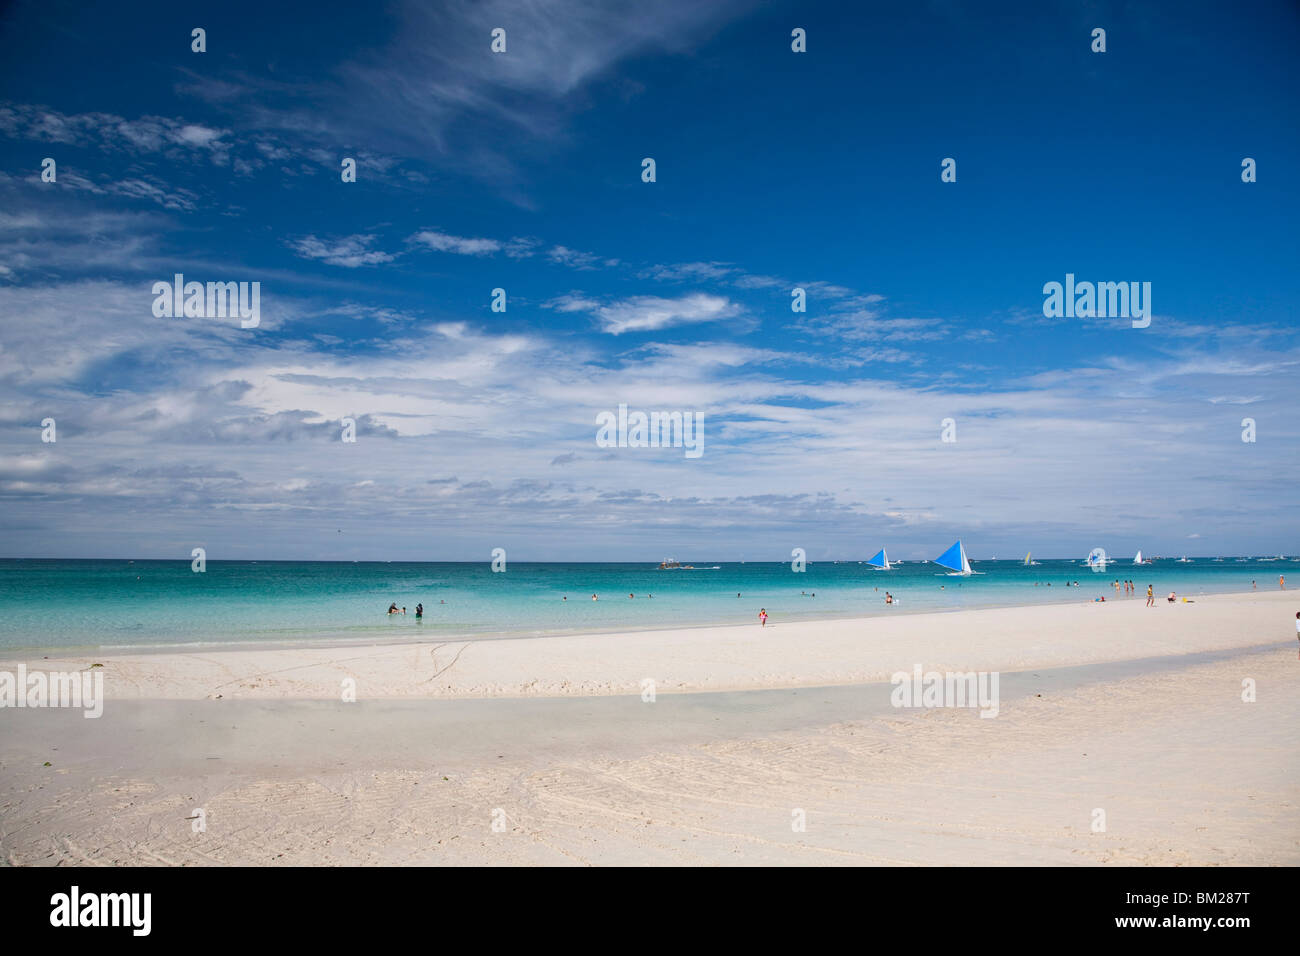 White Beach, one of the best white sand beaches in the world, Boracay, Aklan, Philippines, Southeast Asia Stock Photo